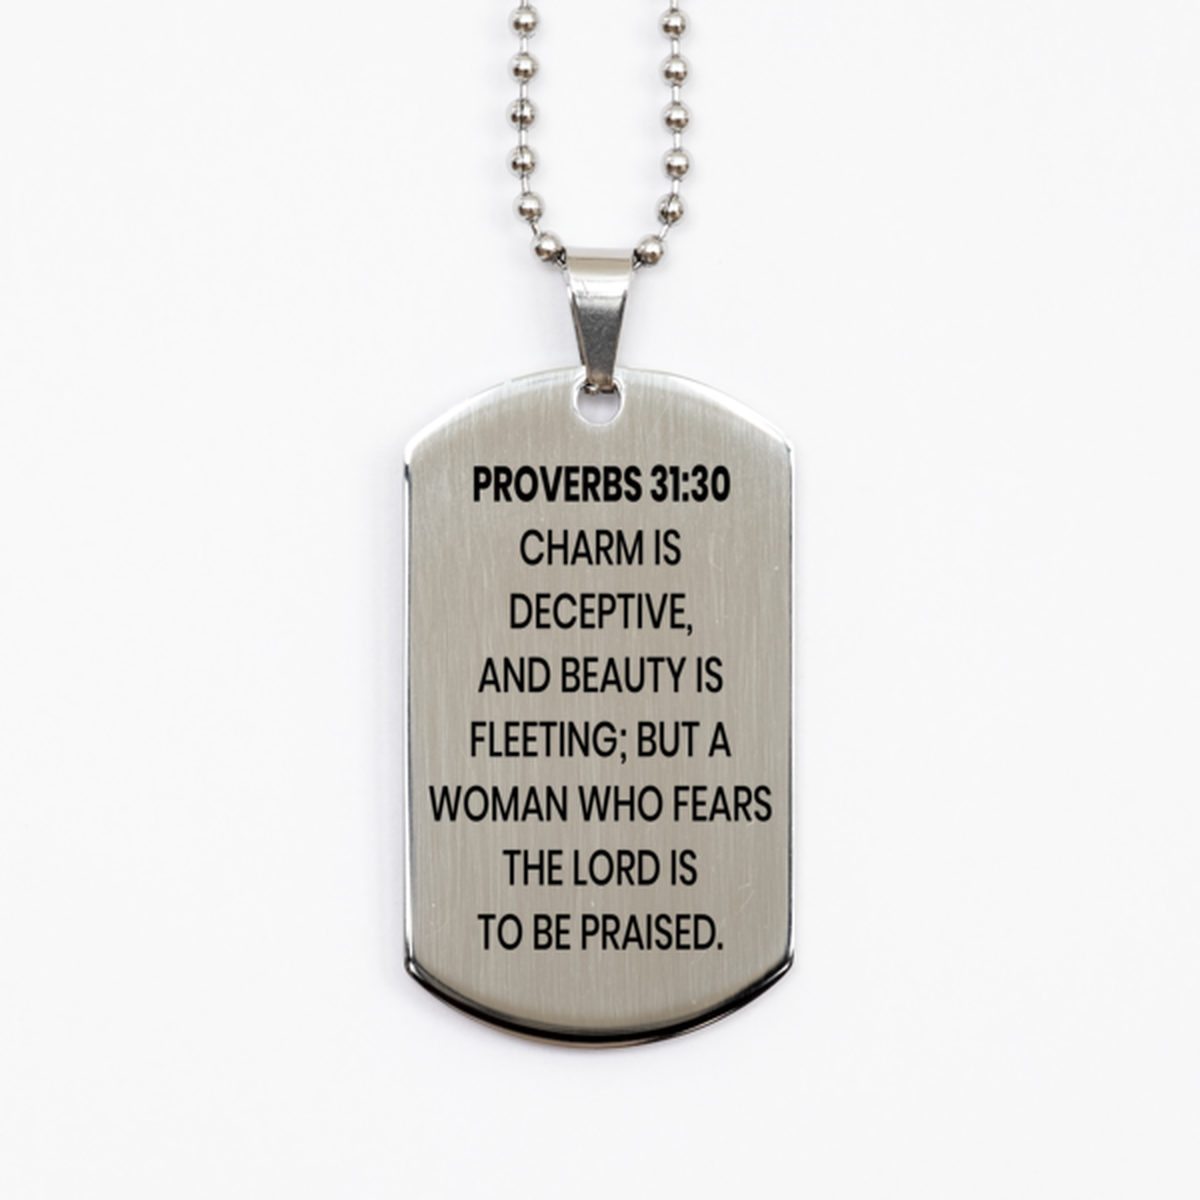 Proverbs 31:30 Necklace, Bible Verse Necklace, Christian Necklace, Christian Birthday Gift, Stainless Steel Dog Tag Necklace, Gift for Christian.